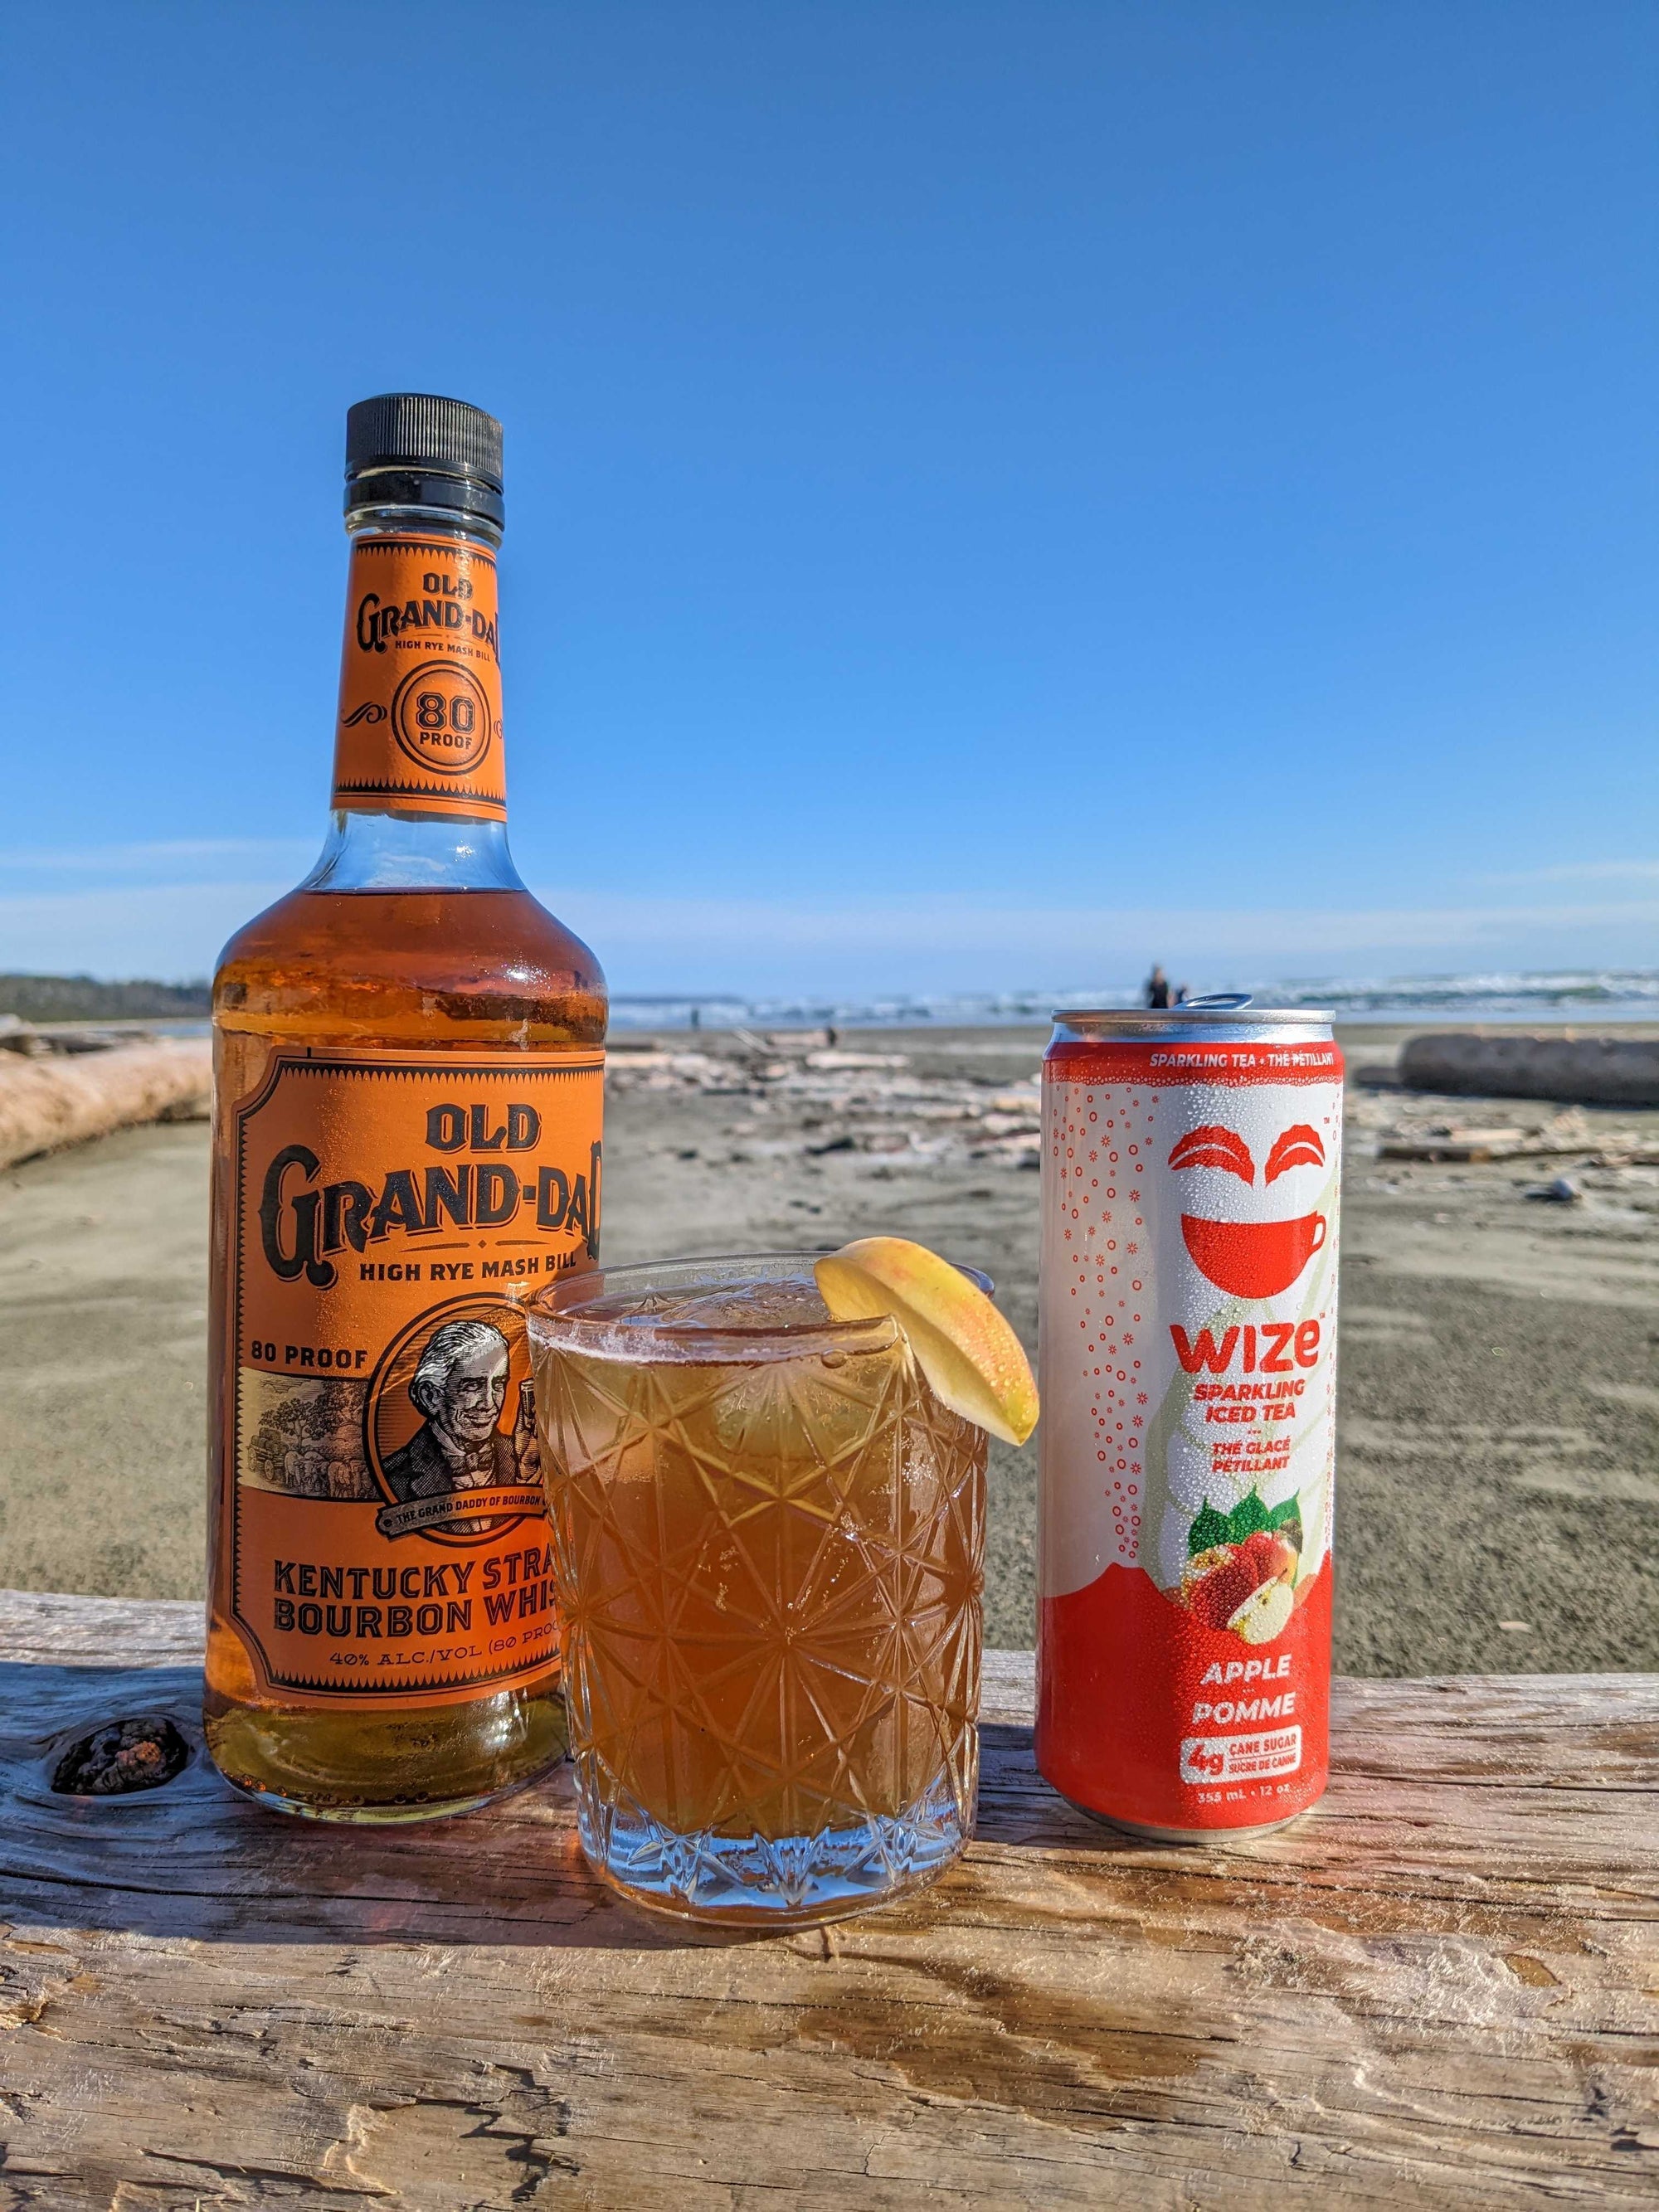 10 Cane Rum Surf's Up Mixology Contest - World Red Eye